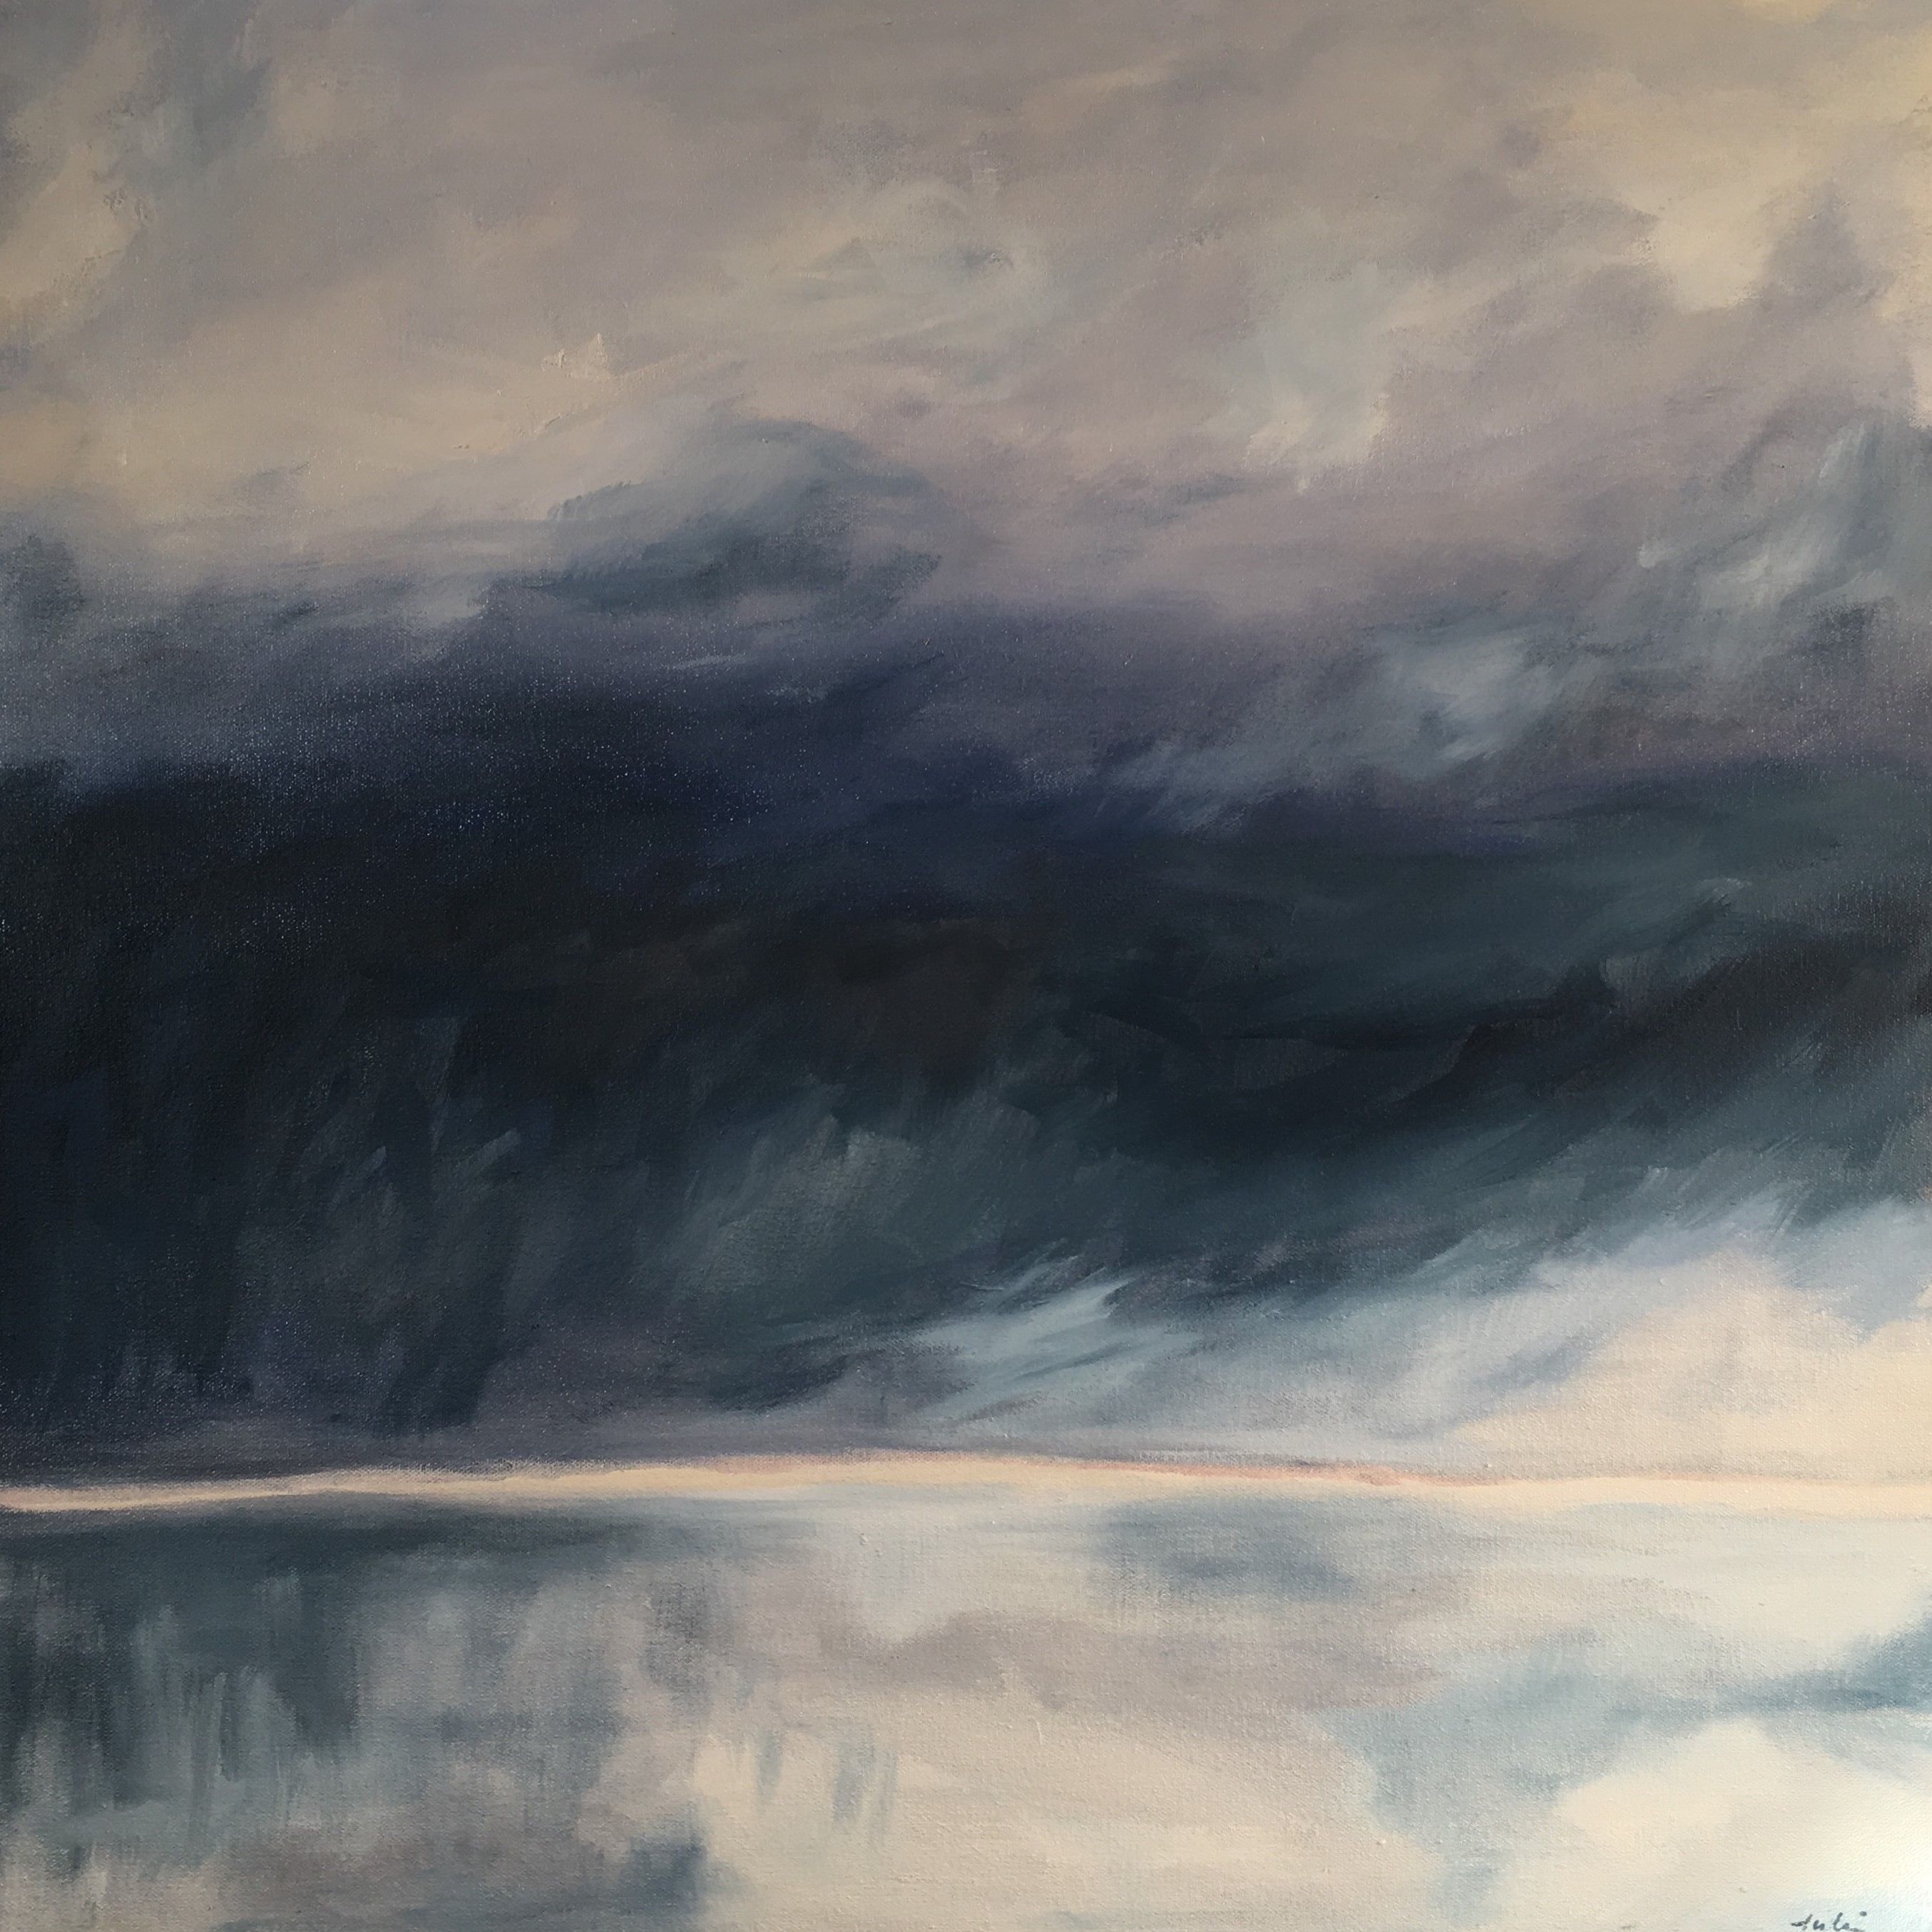  Julie Berg-Linville - "Squall"